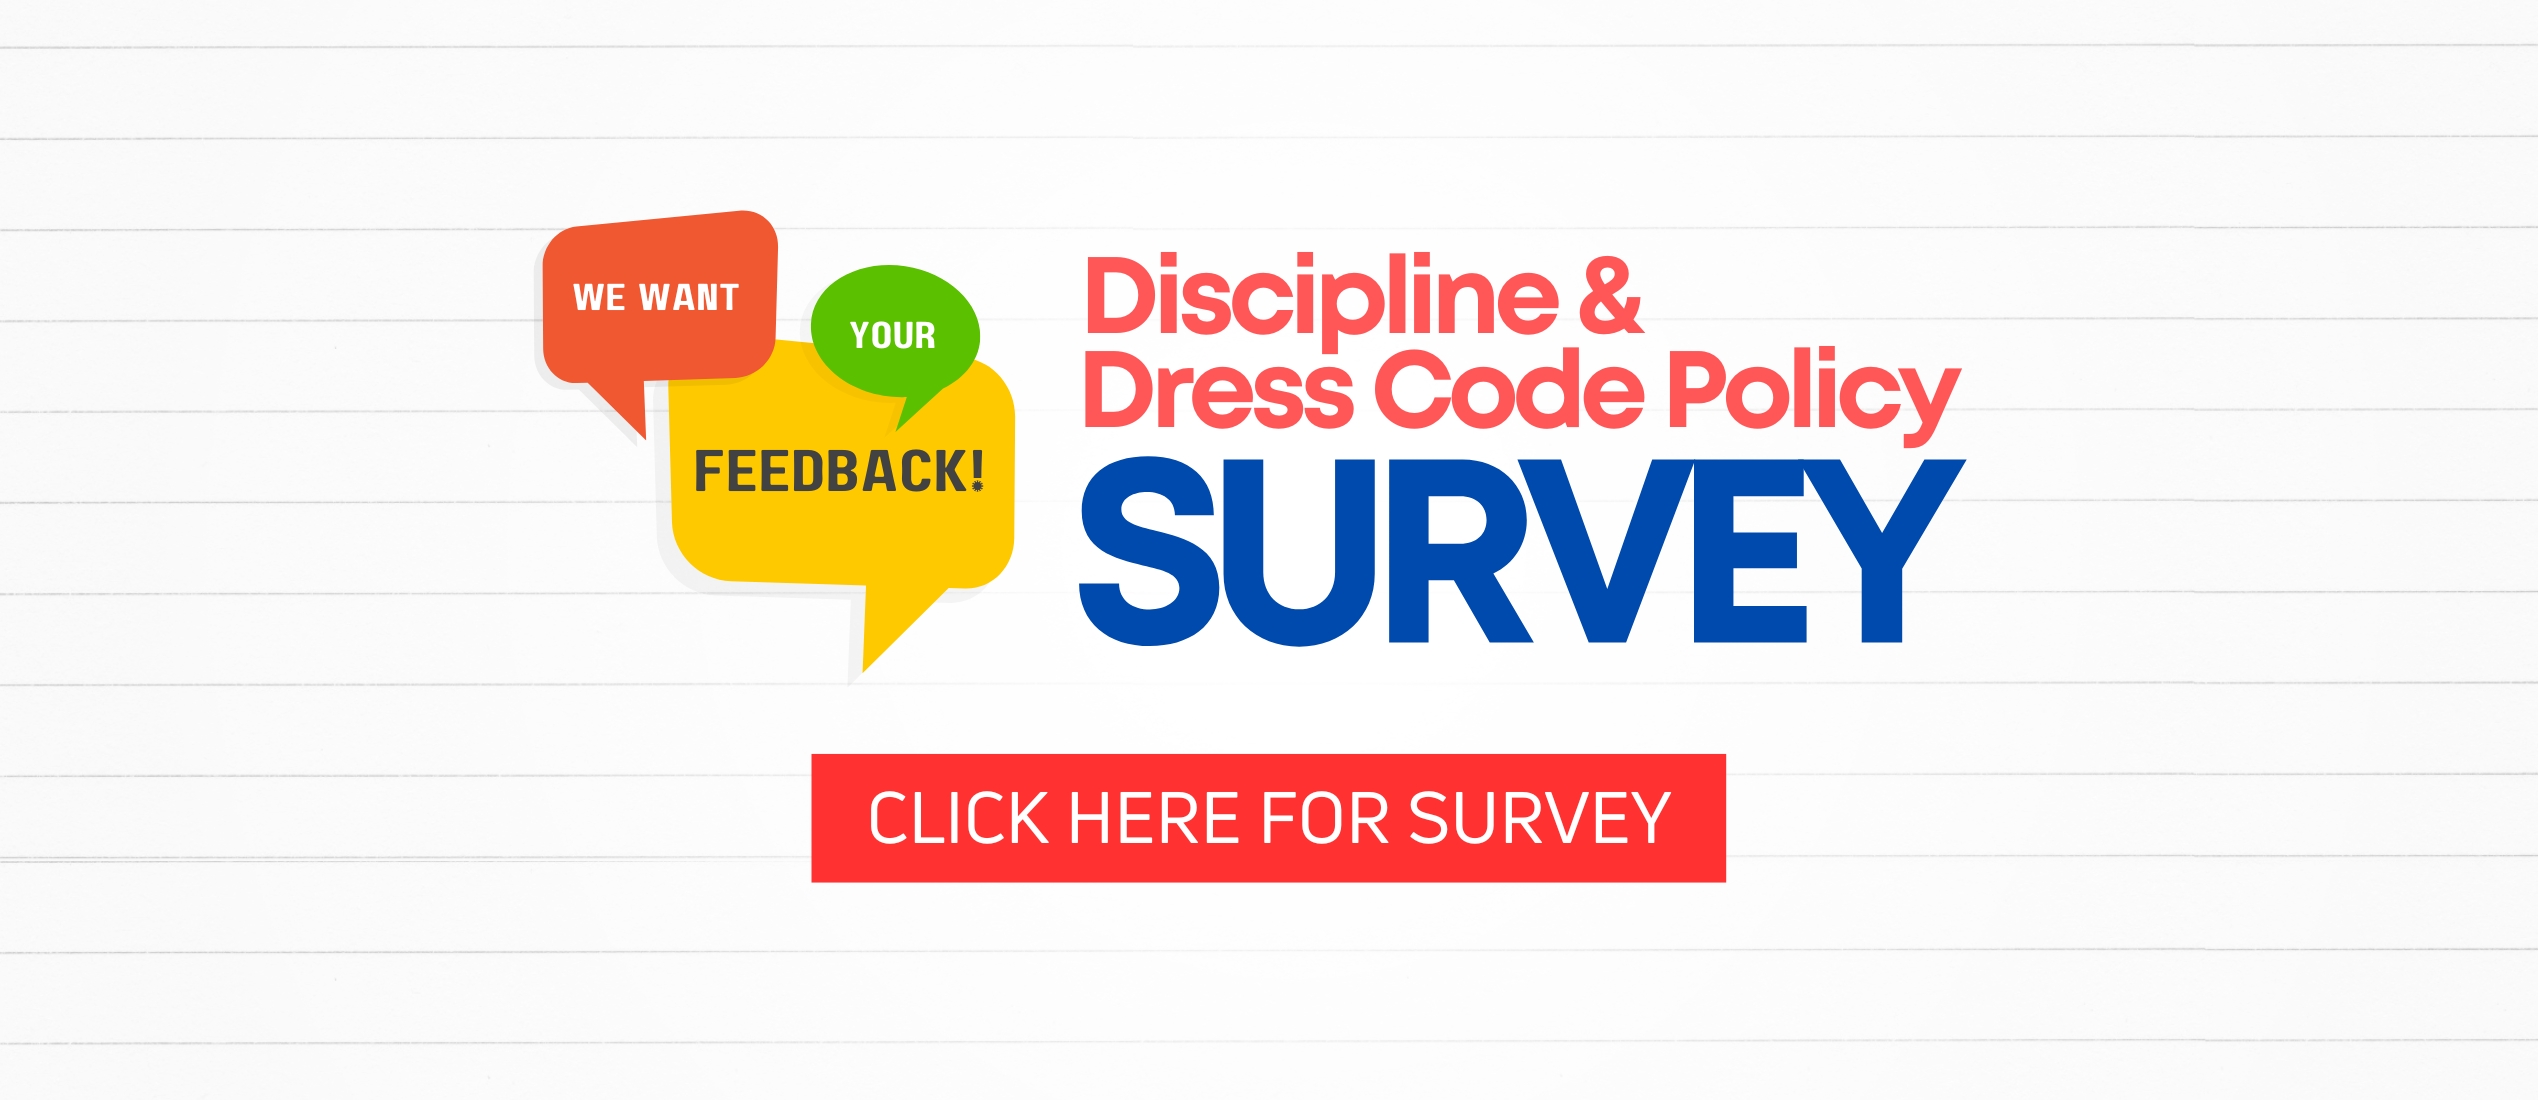 Discipline & Dress Code Policy Survey.  Click Here